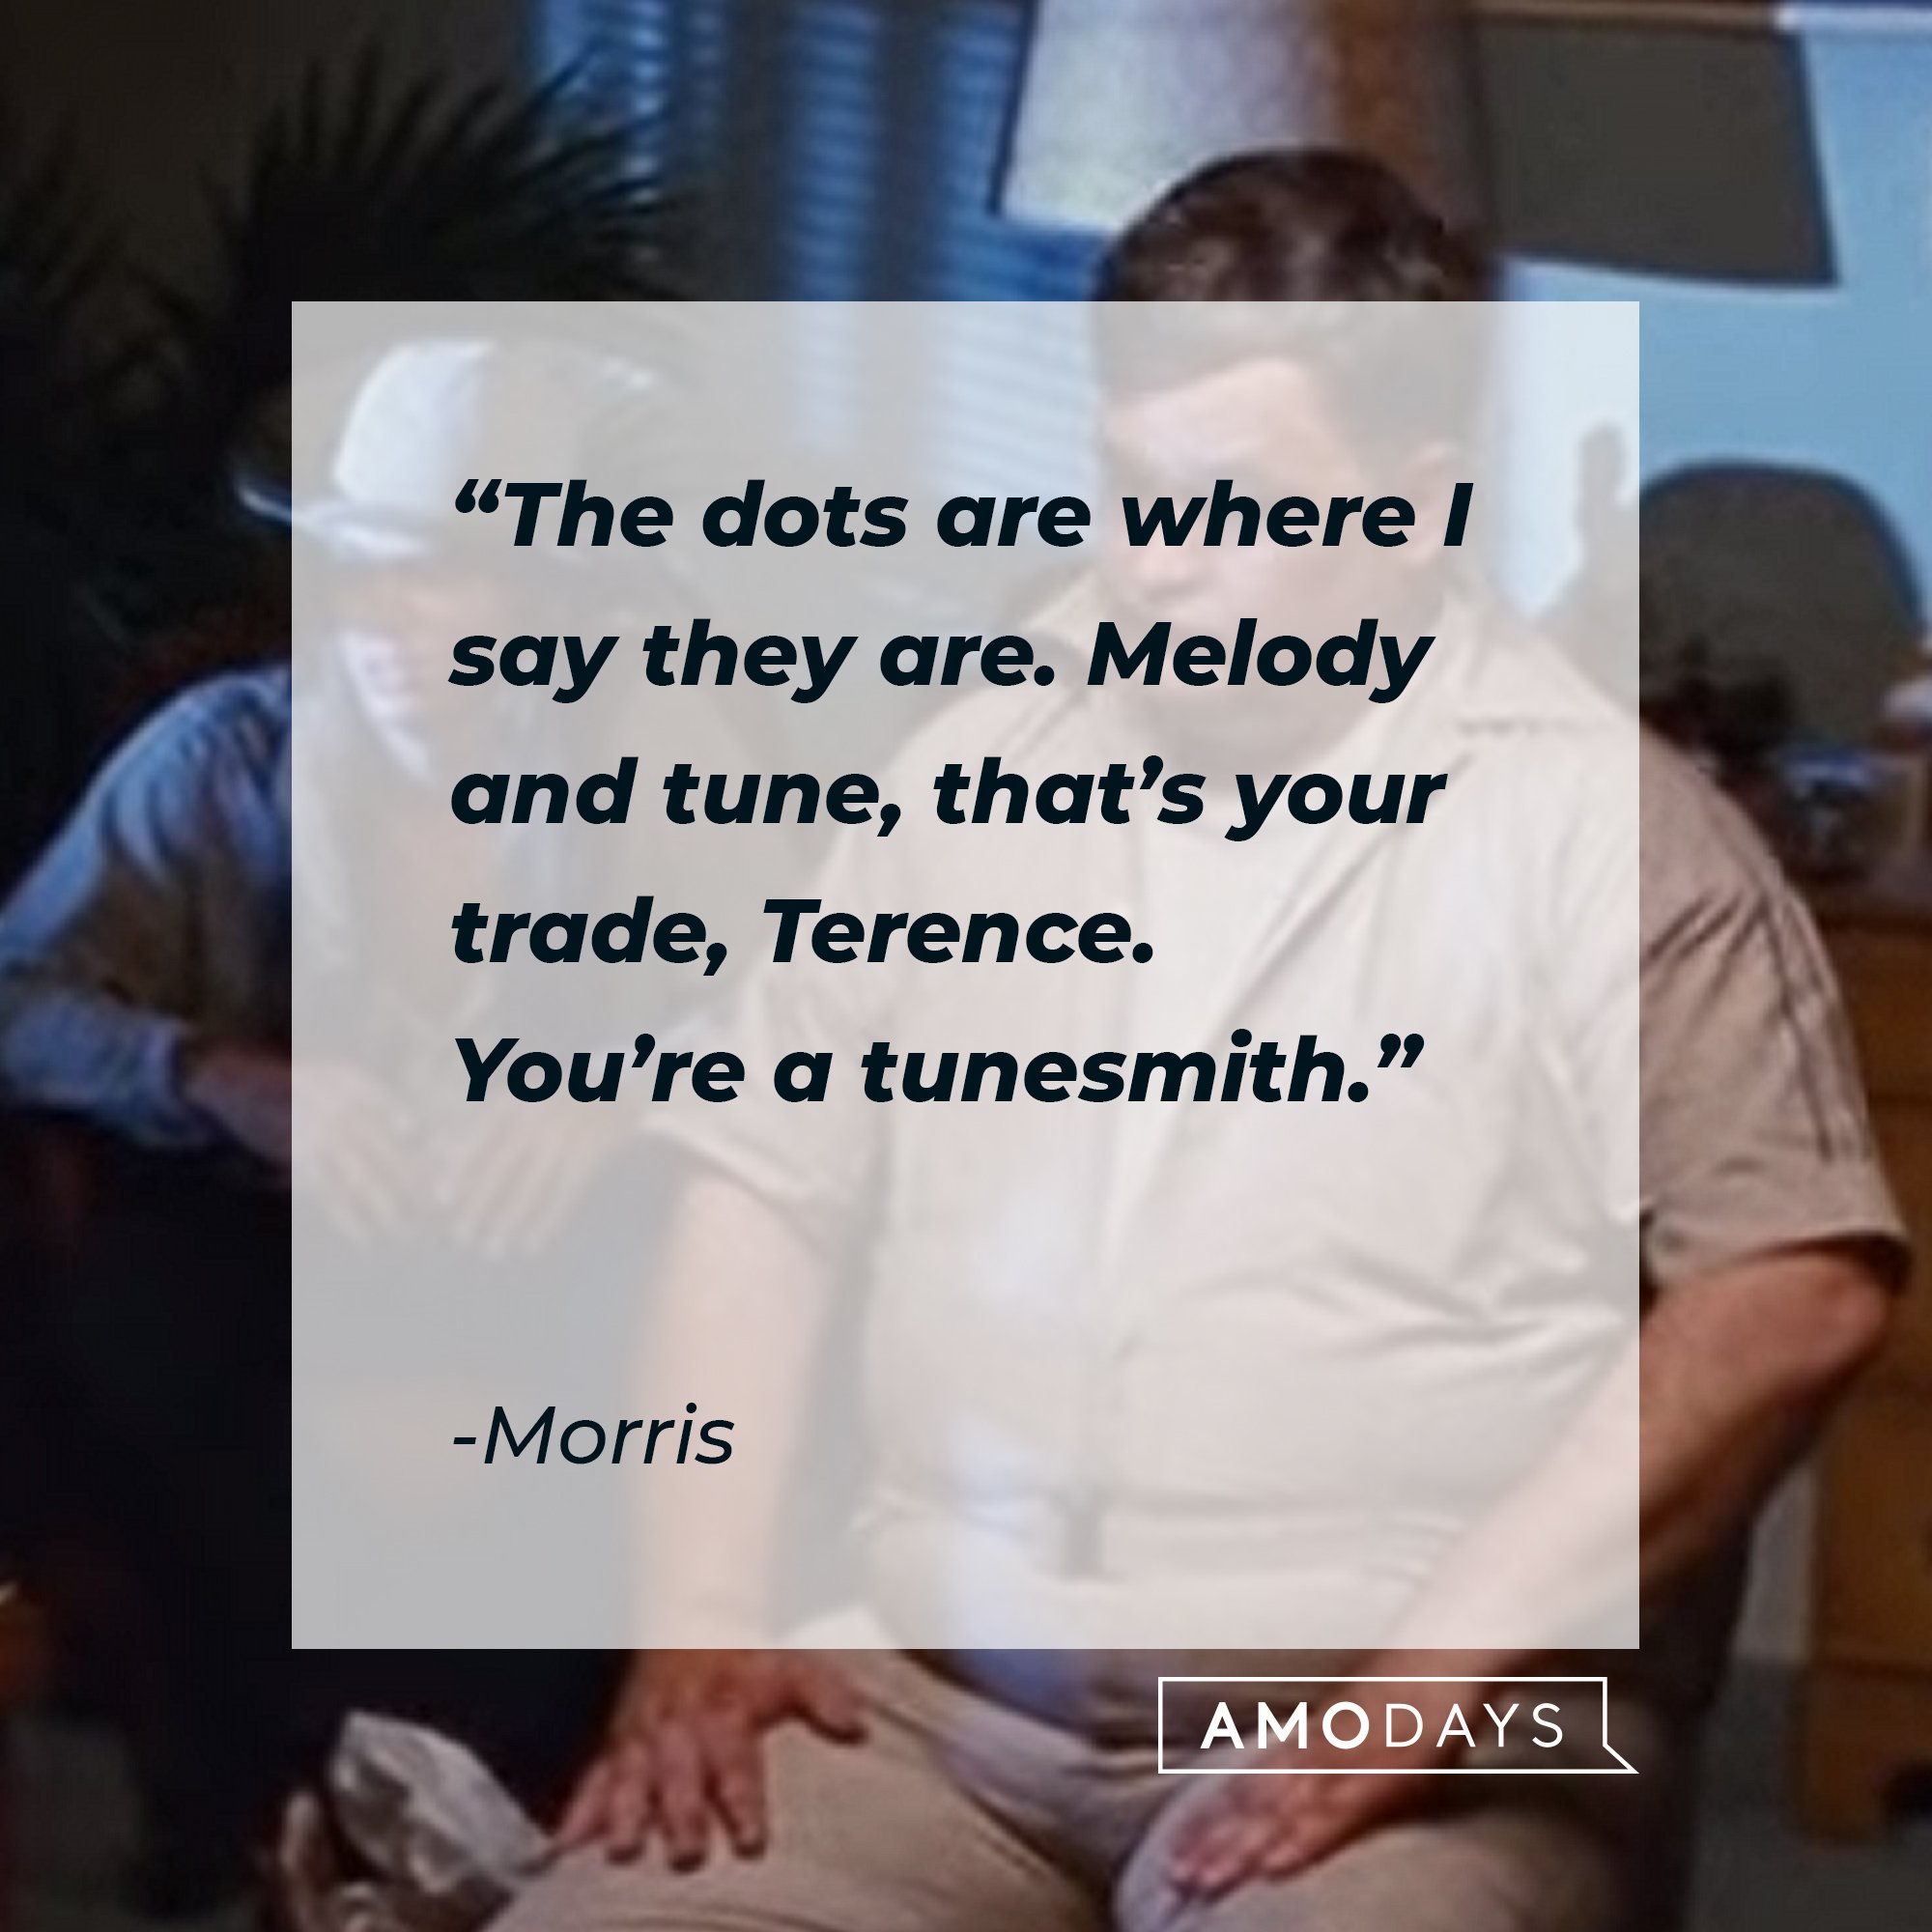 Morris’s quote: "The dots are where I say they are. Melody and tune, that's your trade, Terence. You're a tunesmith." | Image: AmoDays